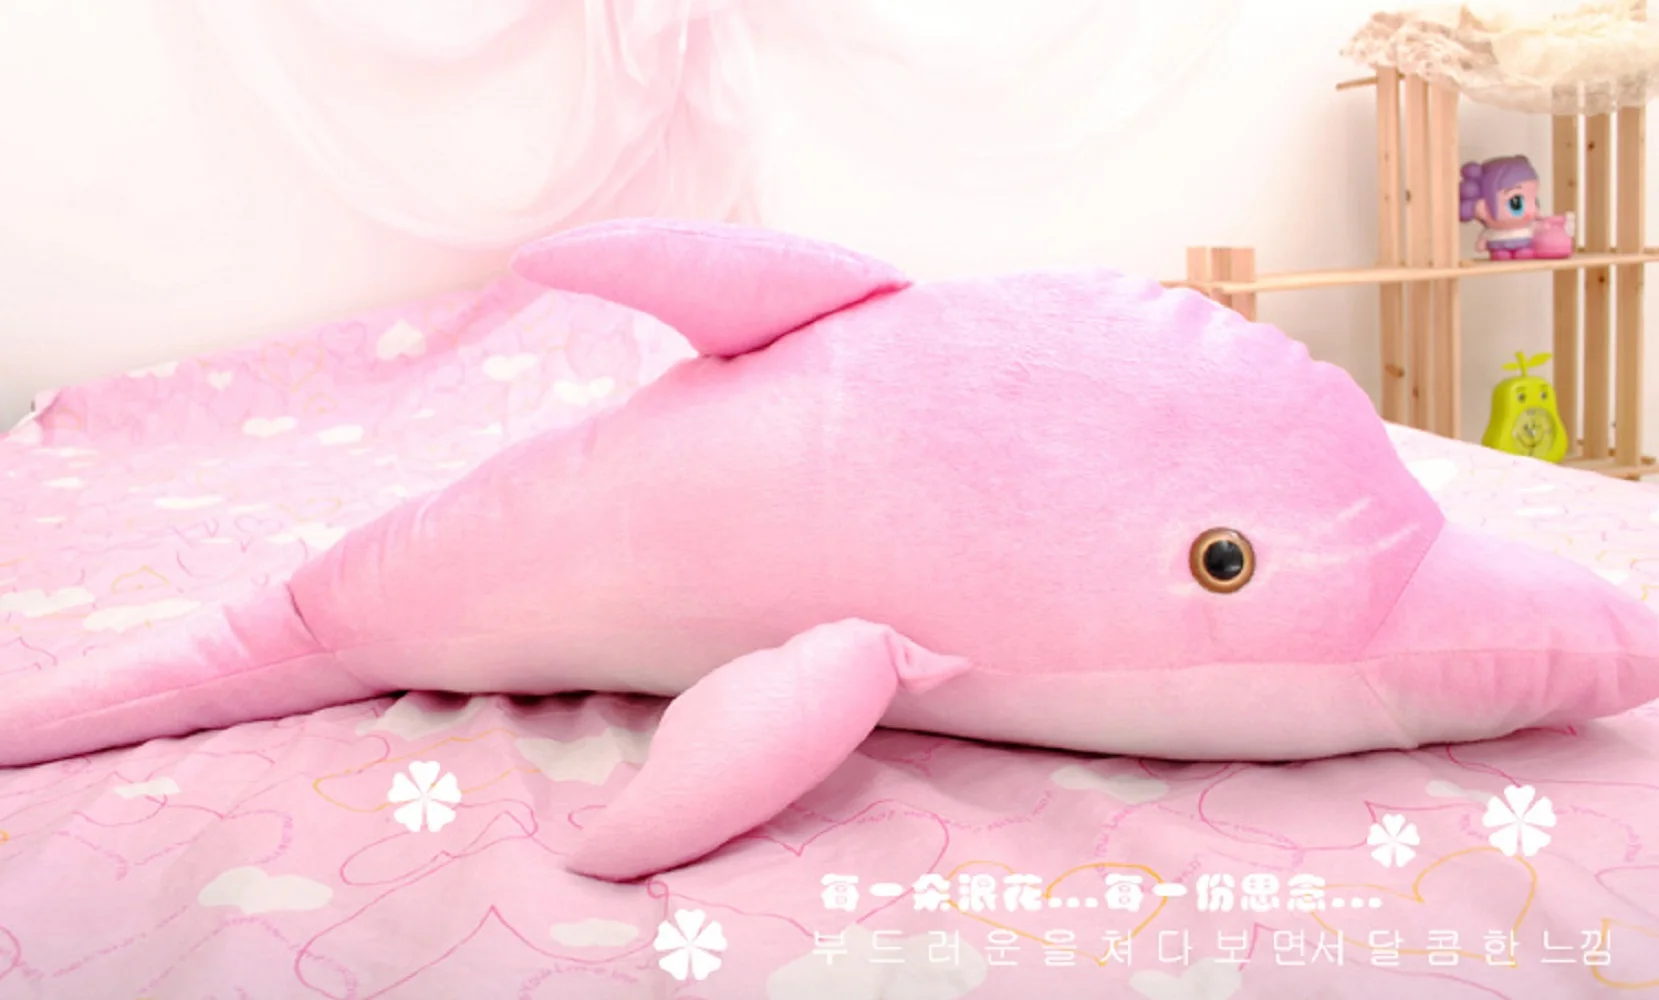 huge-pink-soft-lovely-plush-dolphin-toy-stuffed-dolphin-pillow-large-birthday-gift-toy-about-120cm